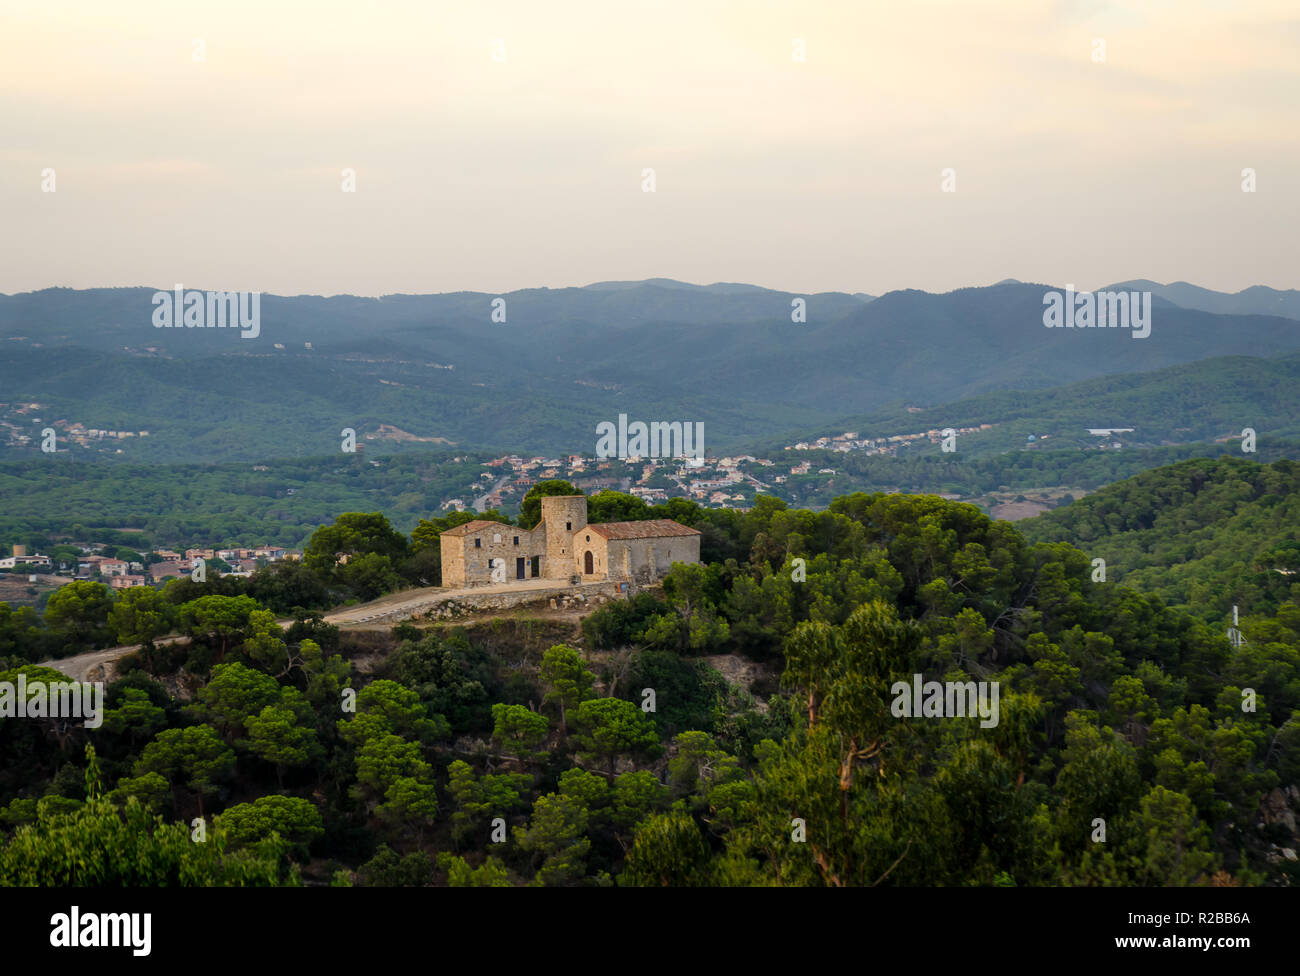 Historical building of antiquity on the top of the hill. Blanes, Costa Brava, Catalonia, Spain. Stock Photo